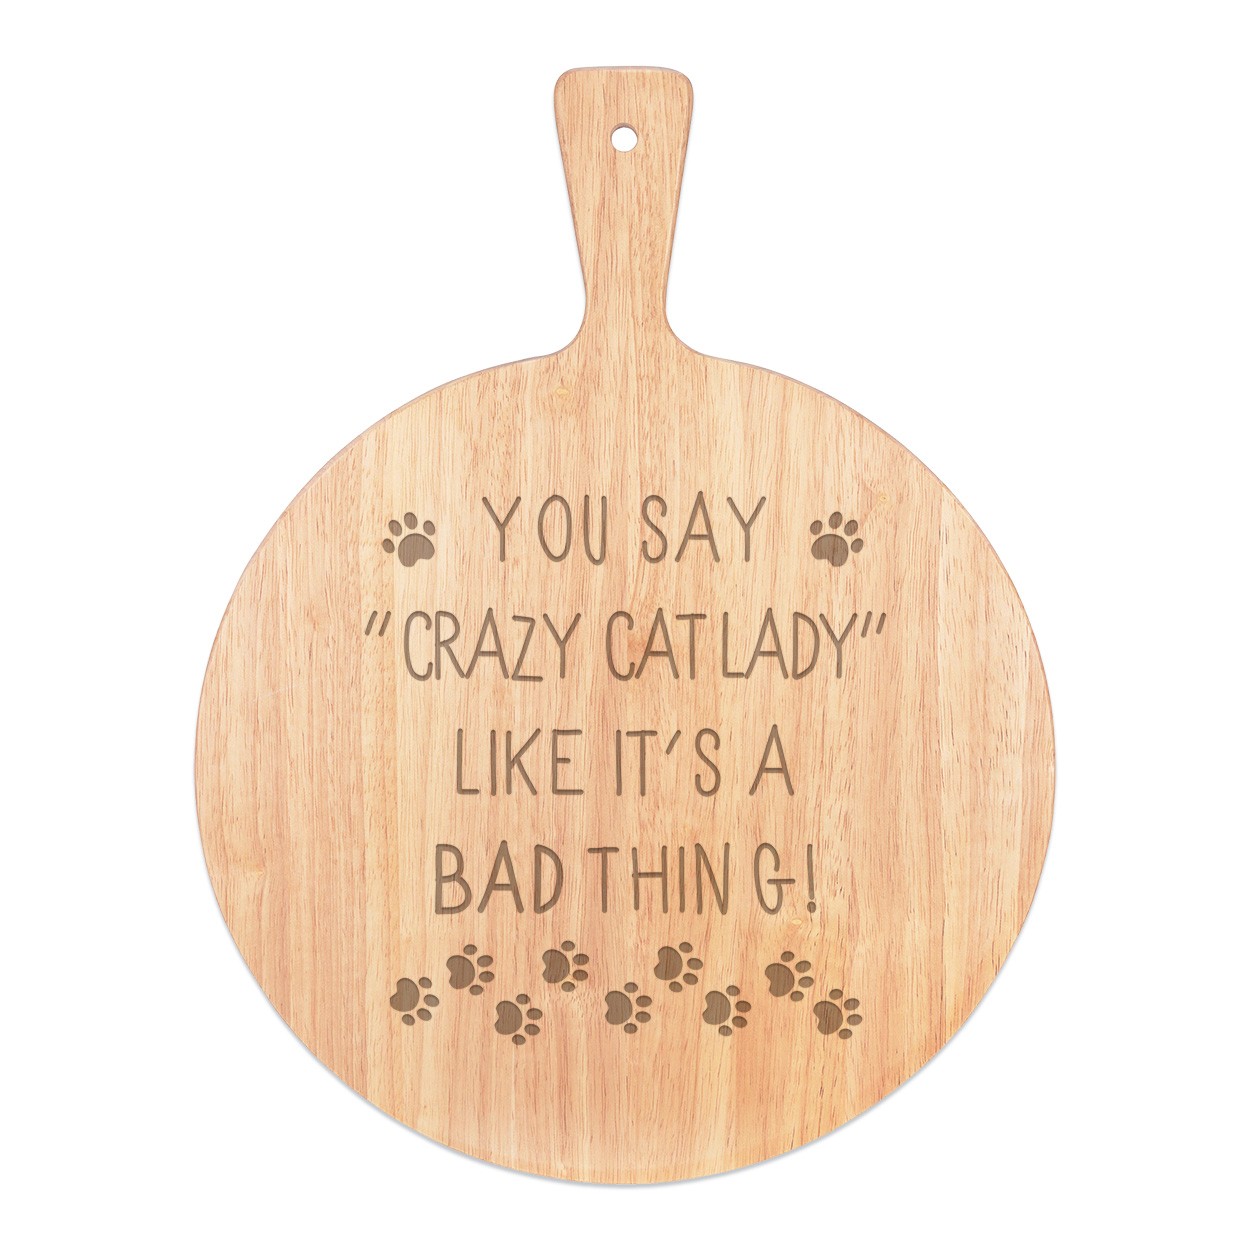 You Say Crazy Cat Lady Like It's A Bad Thing Pizza Board Paddle Serving Tray Handle Round Wooden 45x34cm